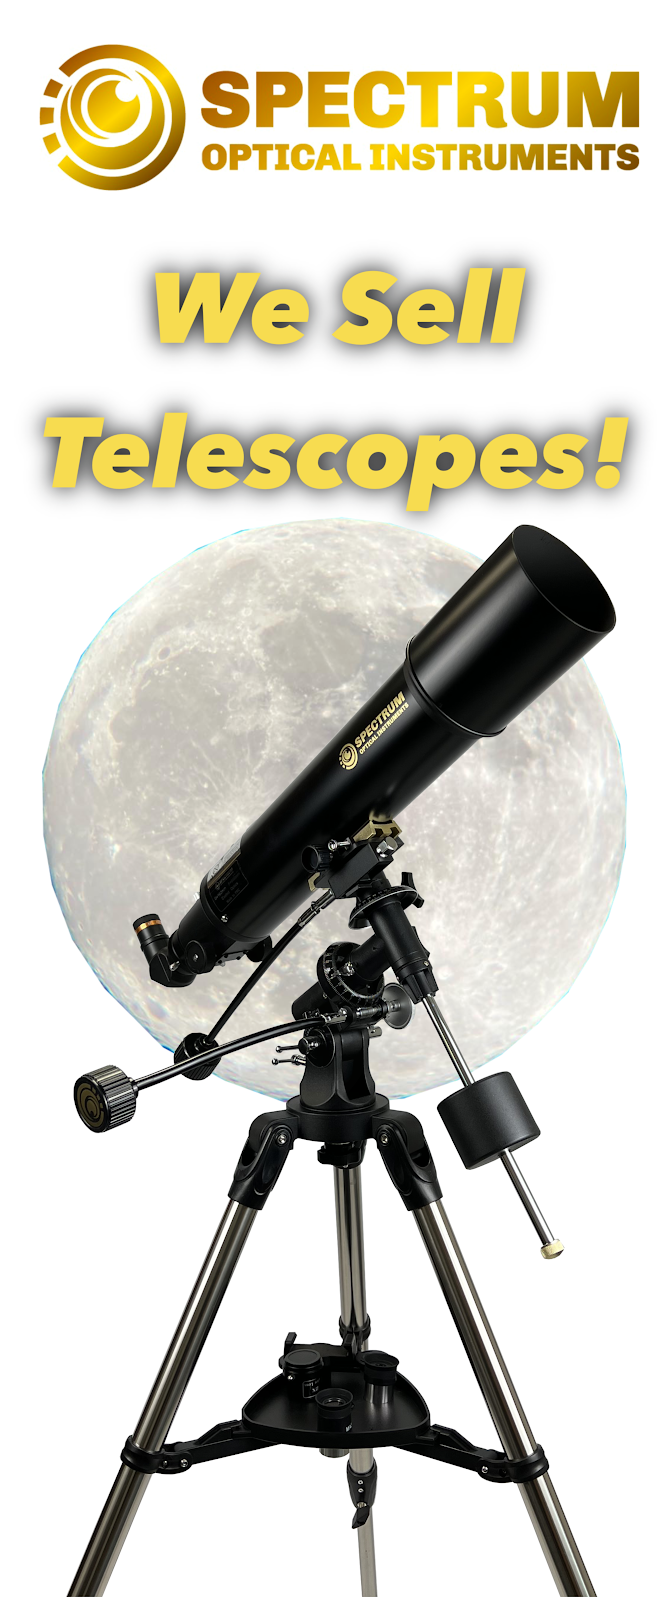 Spectrum Optical Instruments | 20914 Bake Pkwy suite 108, Lake Forest, CA 92630, USA | Phone: (657) 532-8308